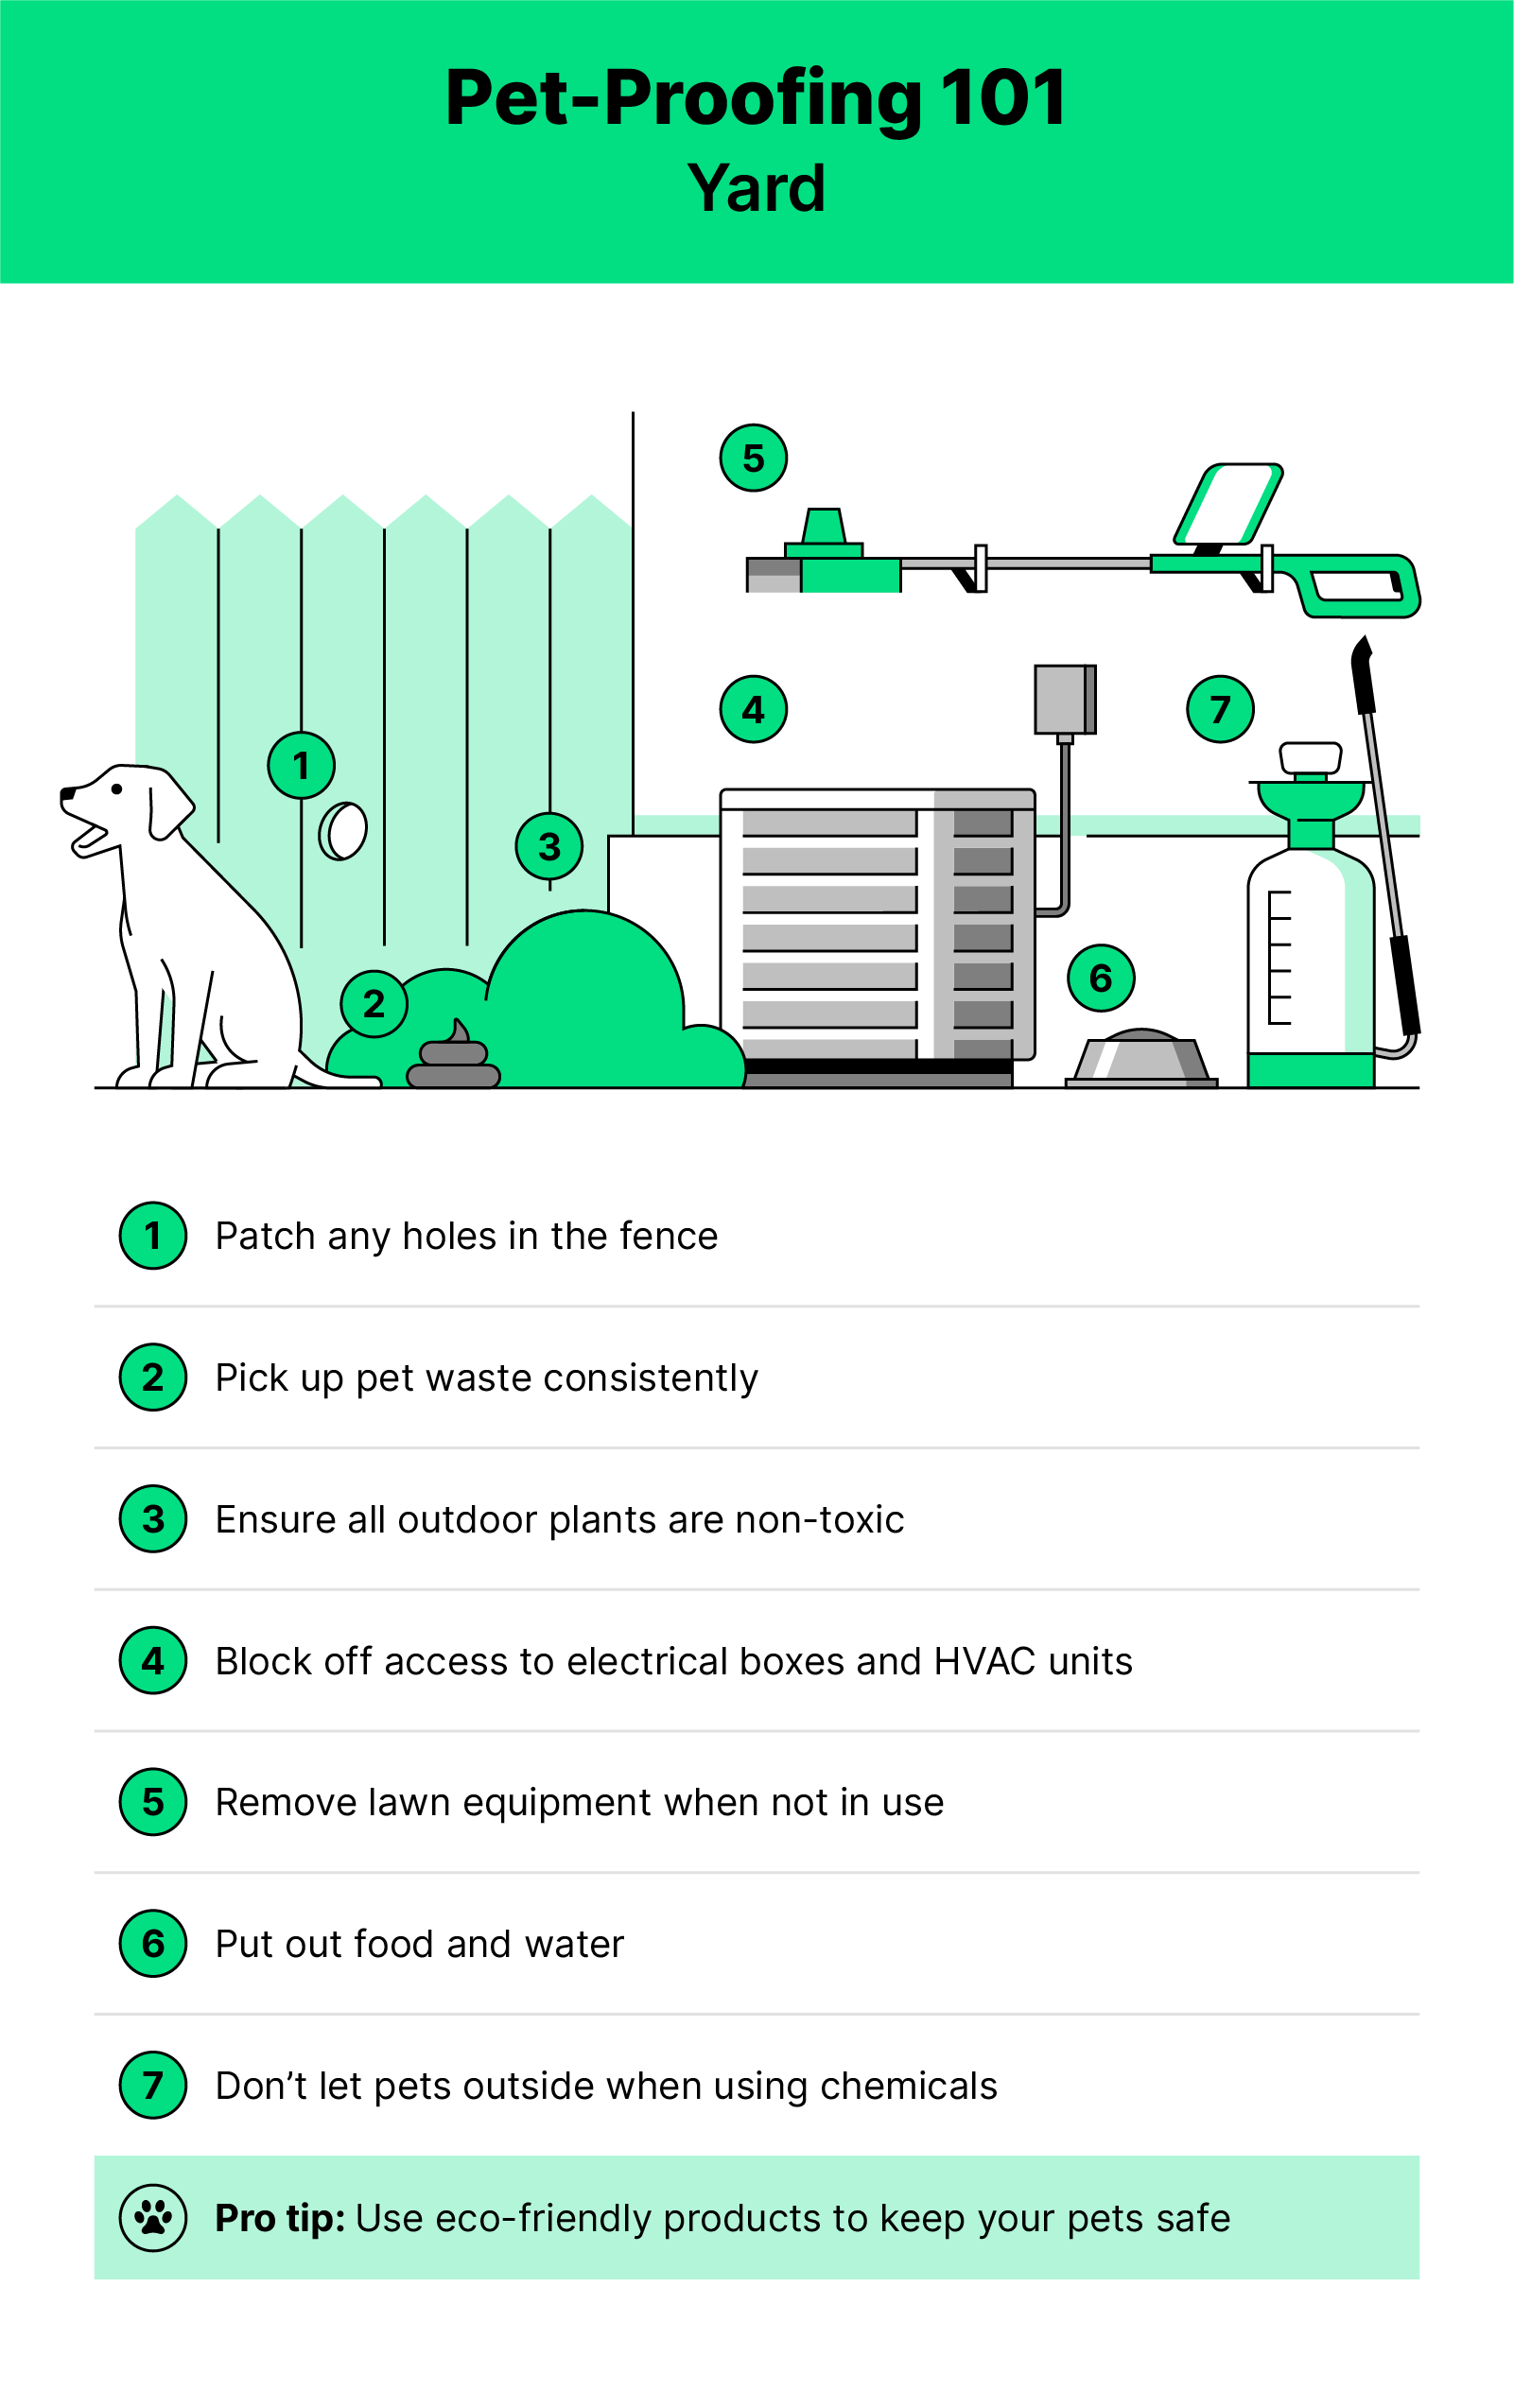 Green white and black illustration of a yard with a dog inside and pet proofing tips